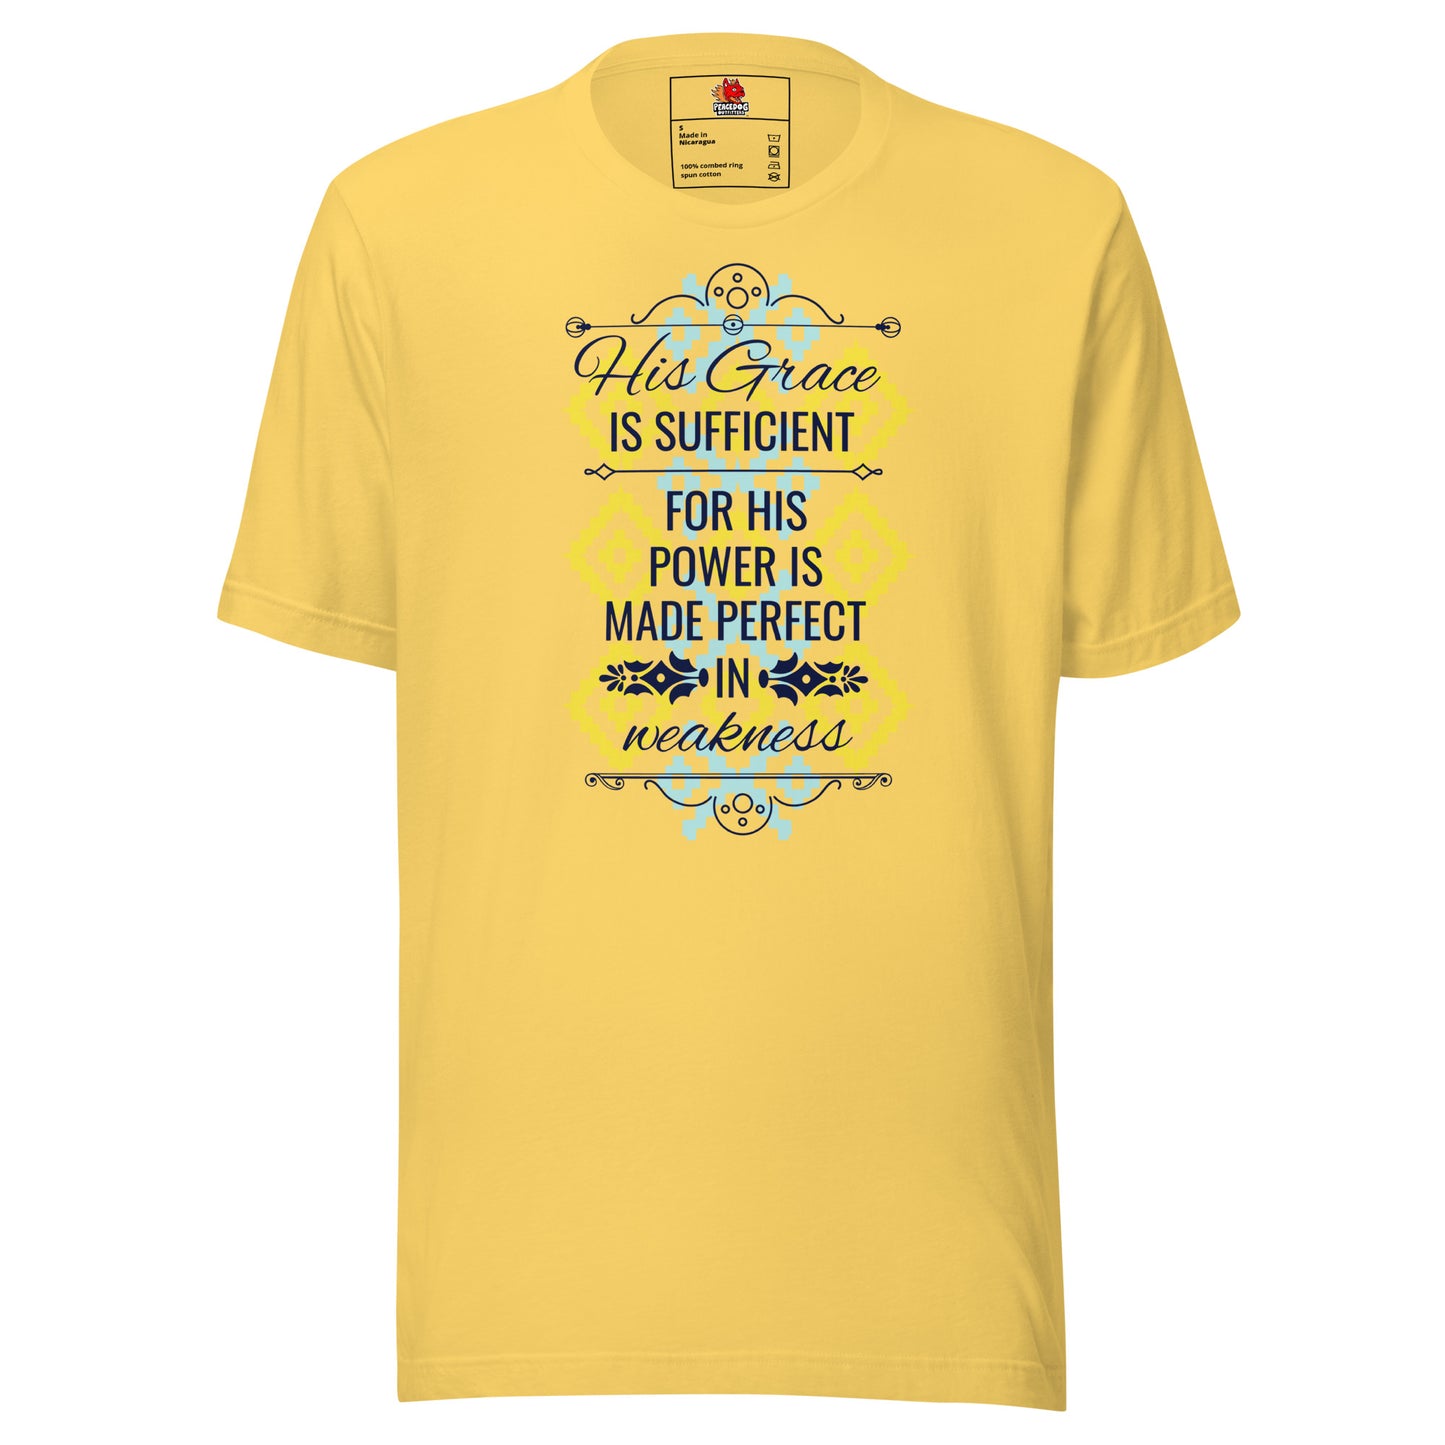 His Grace is sufficient... T-Shirt